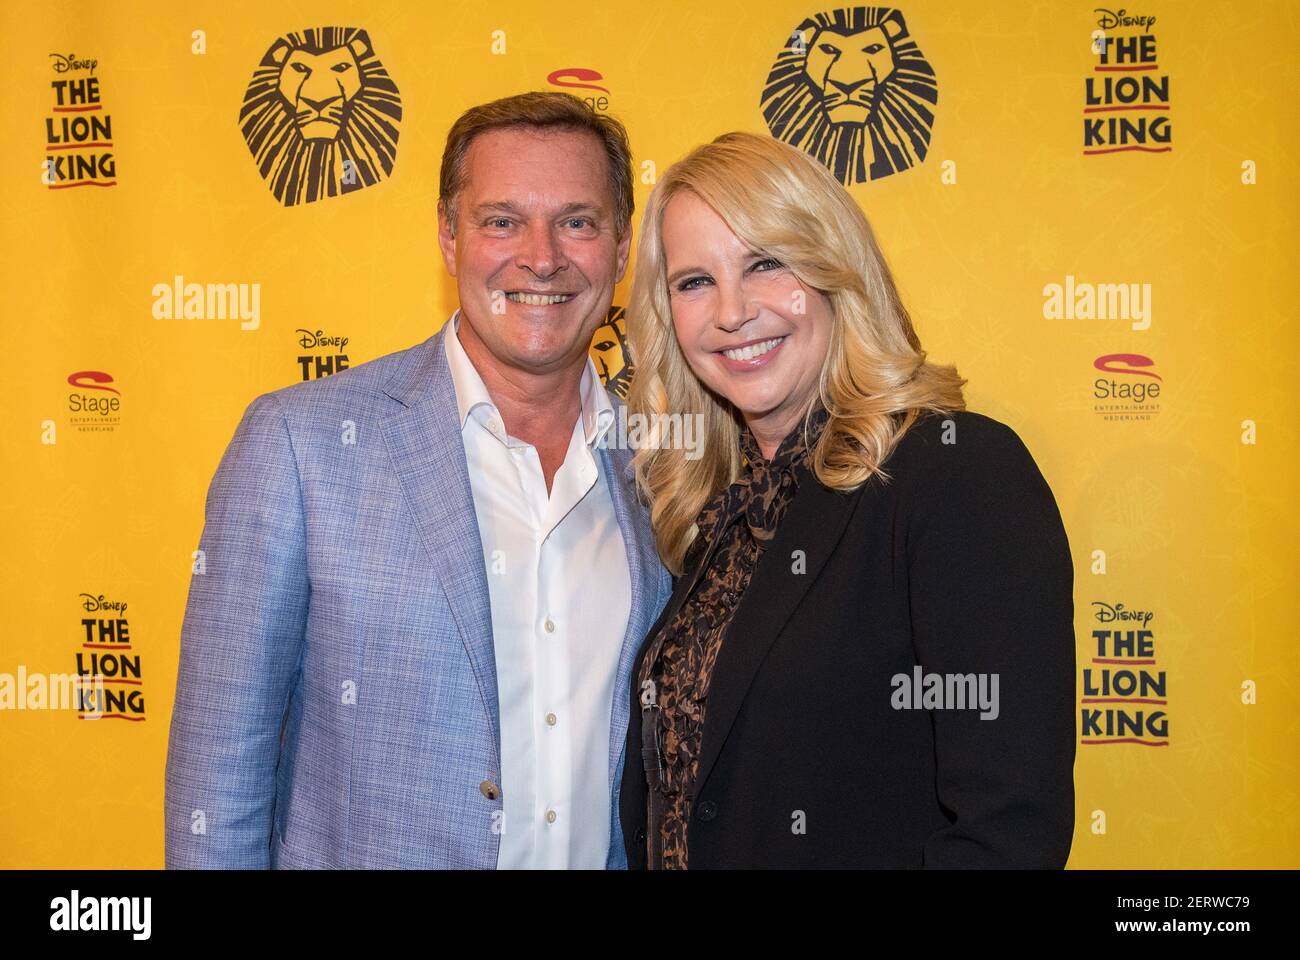 Albert Verlinde and Linda de Mol during the second anniversary of The Lion  King at the AFAS Circus Theater in Scheveningen, the LINDA.foundation by  Linda de Mol will receive a 50,000 checue. (